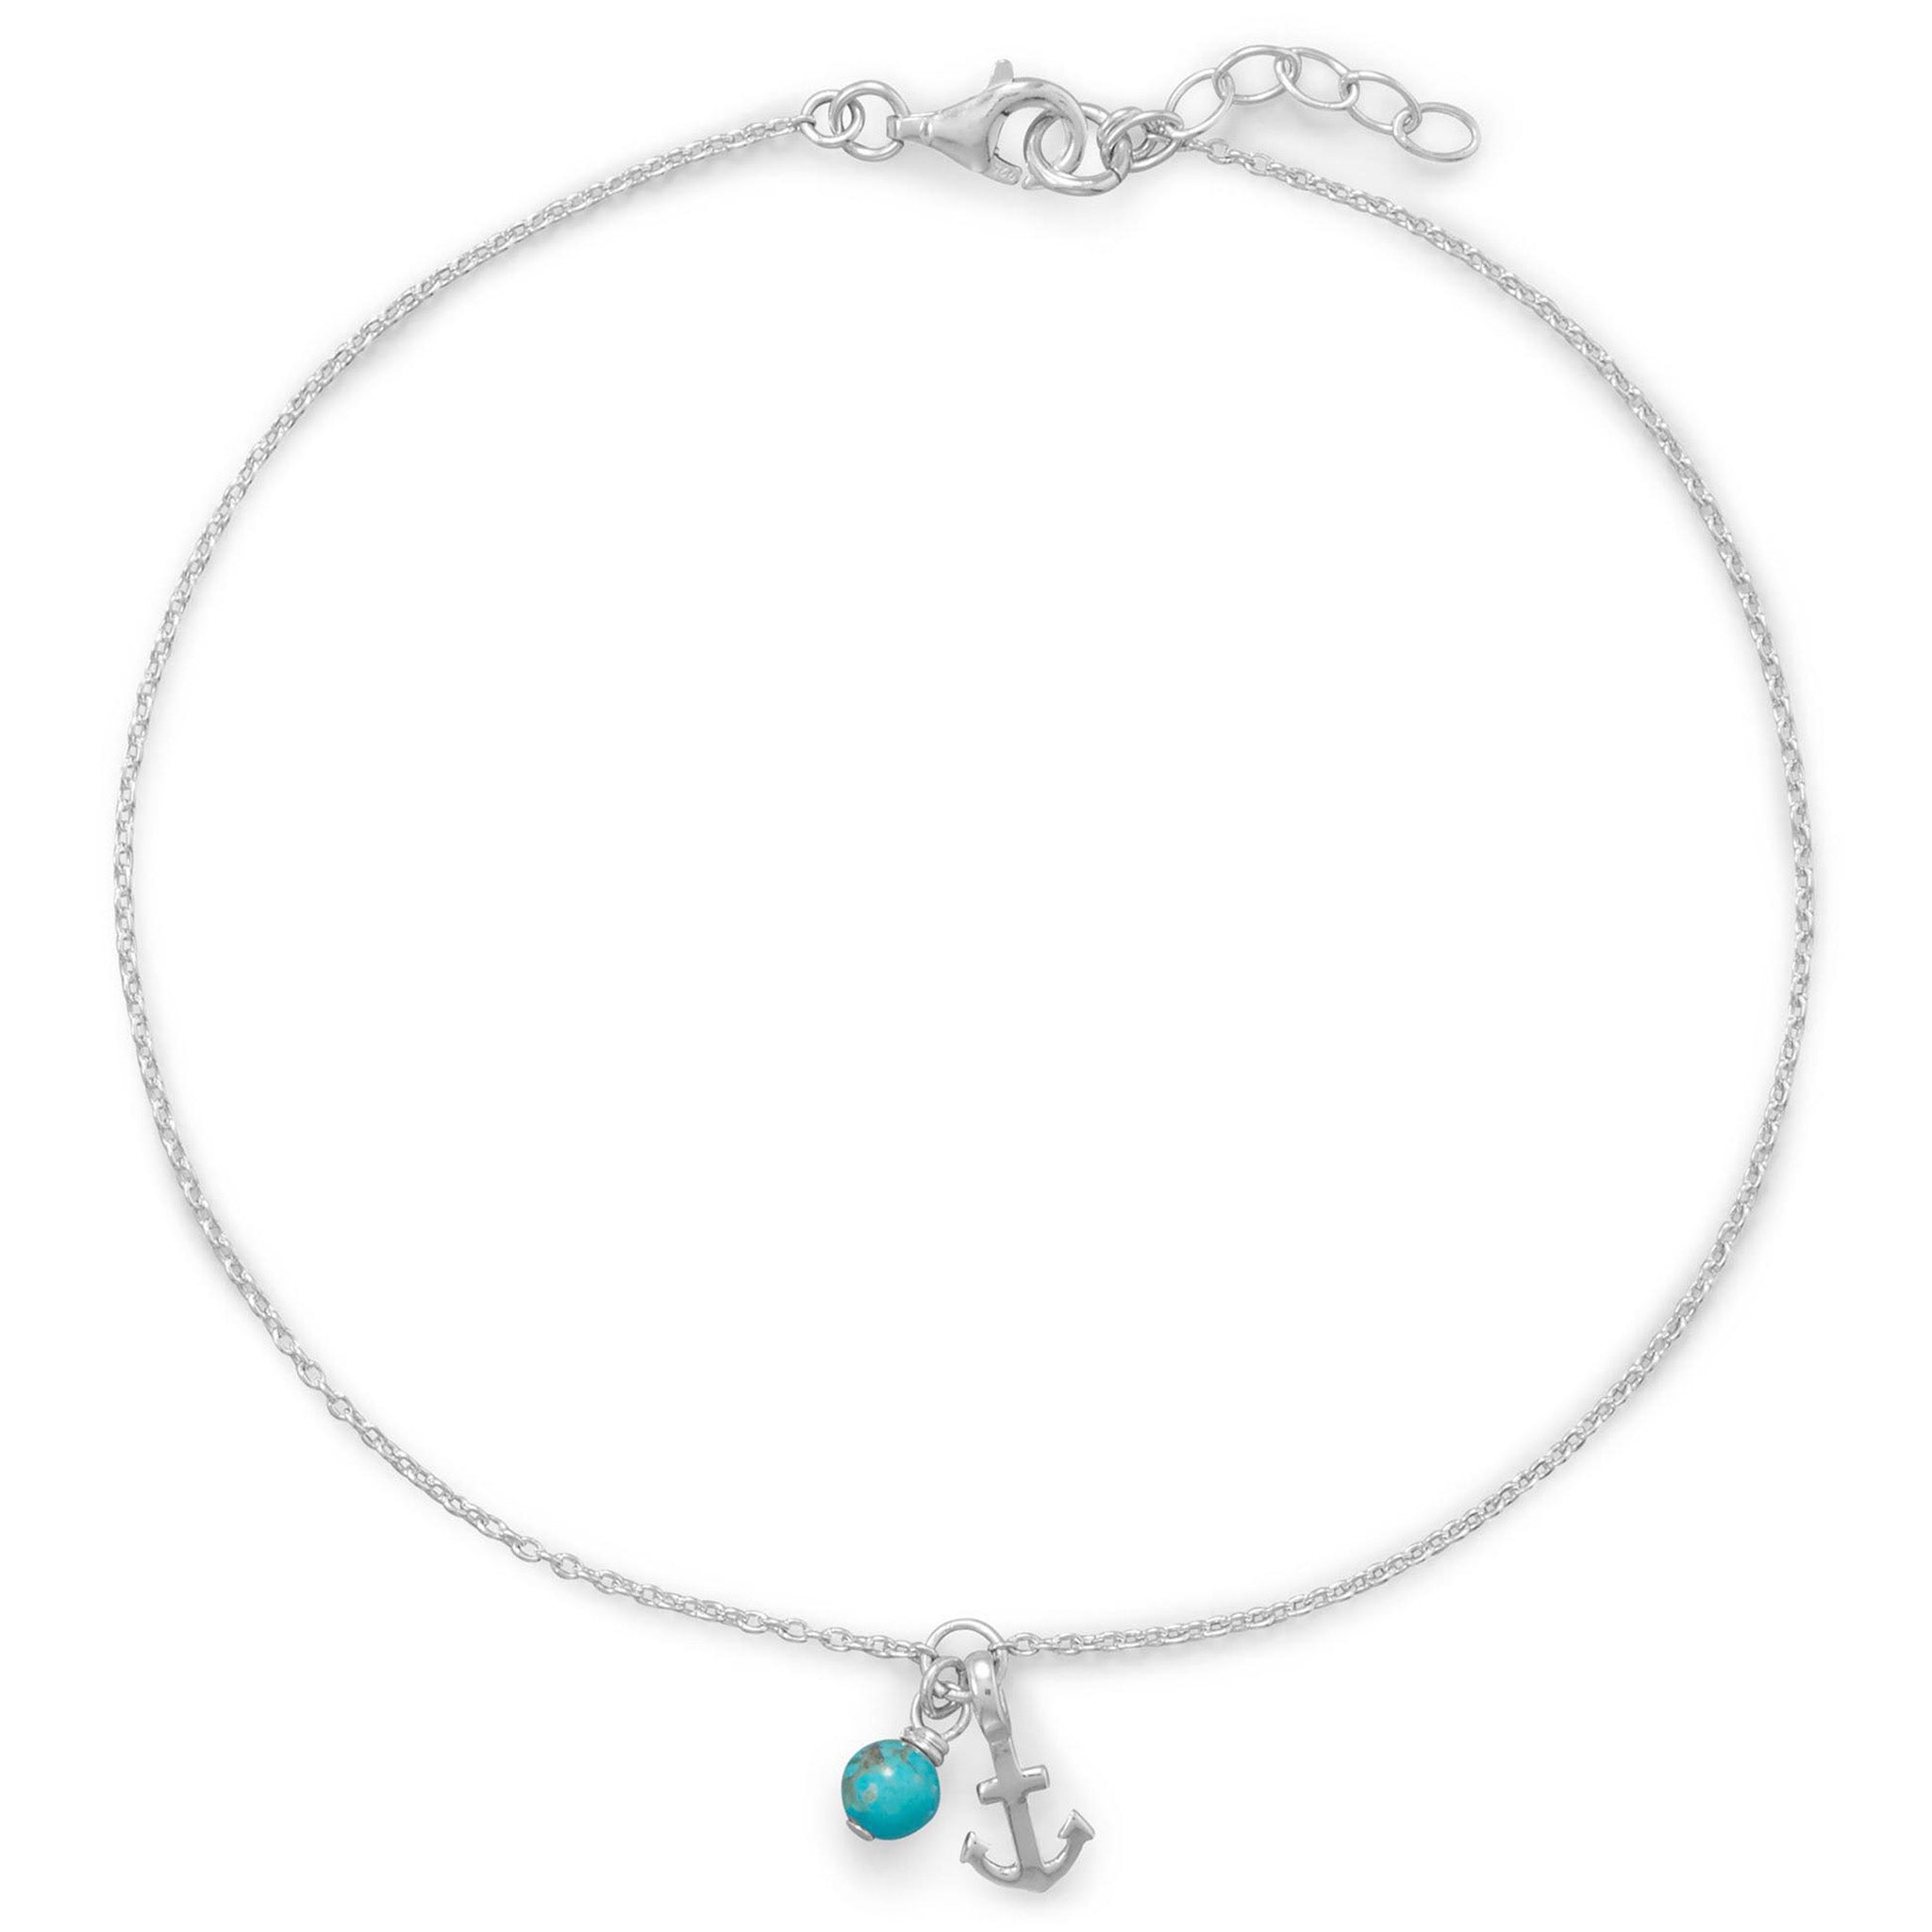 Anchor and Turquoise Bead Charm Anklet